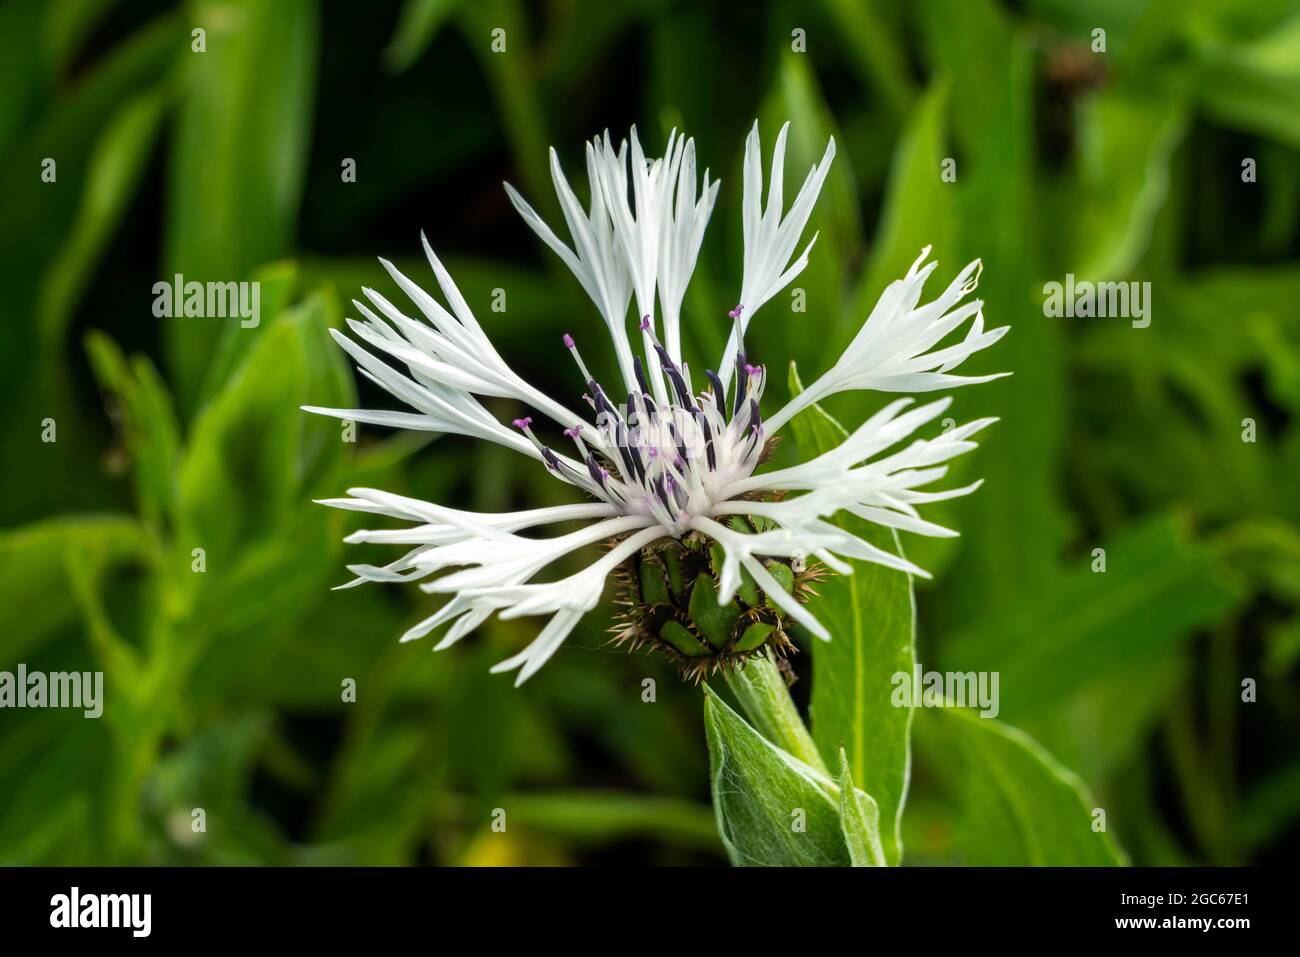 Centaurea montana 'Alaba' a summer flowering plant with a ragged petalled summertime flower commonly known as white perennial cornflower, stock photo Stock Photo